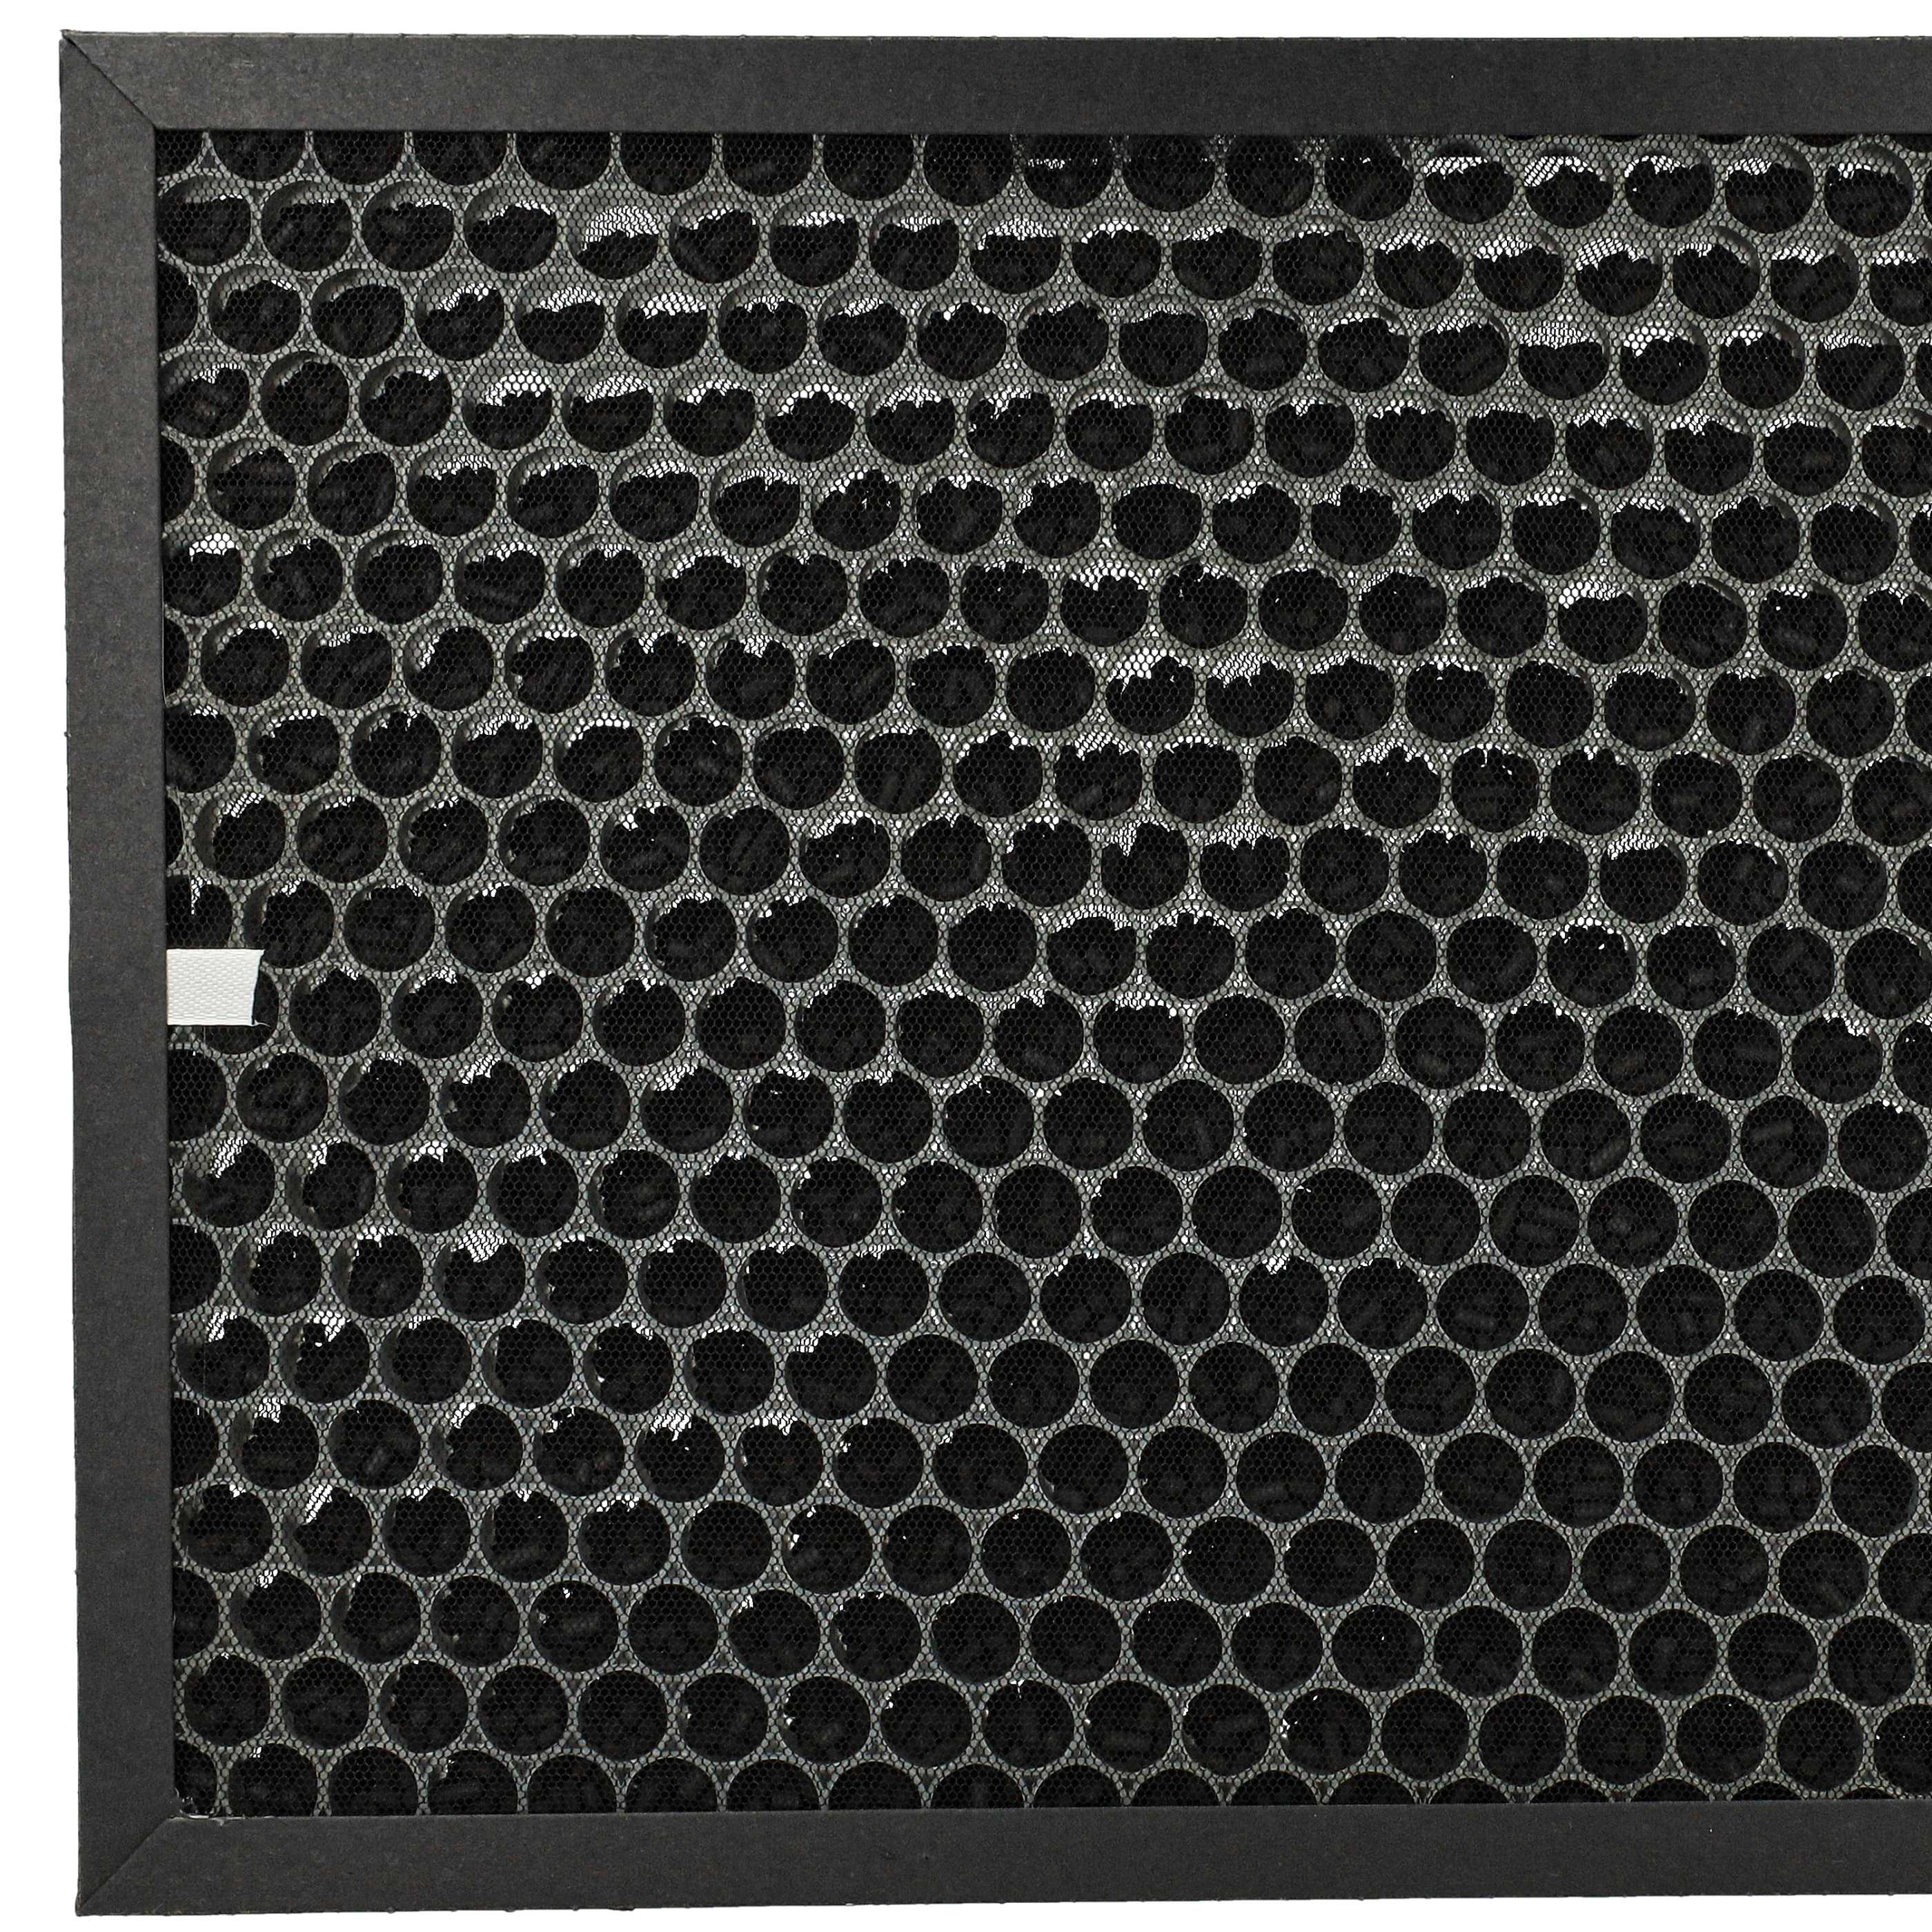 Activated Carbon Filter replaces Honeywell HRF-L710E for Honeywell Air Purifier - Air Filter